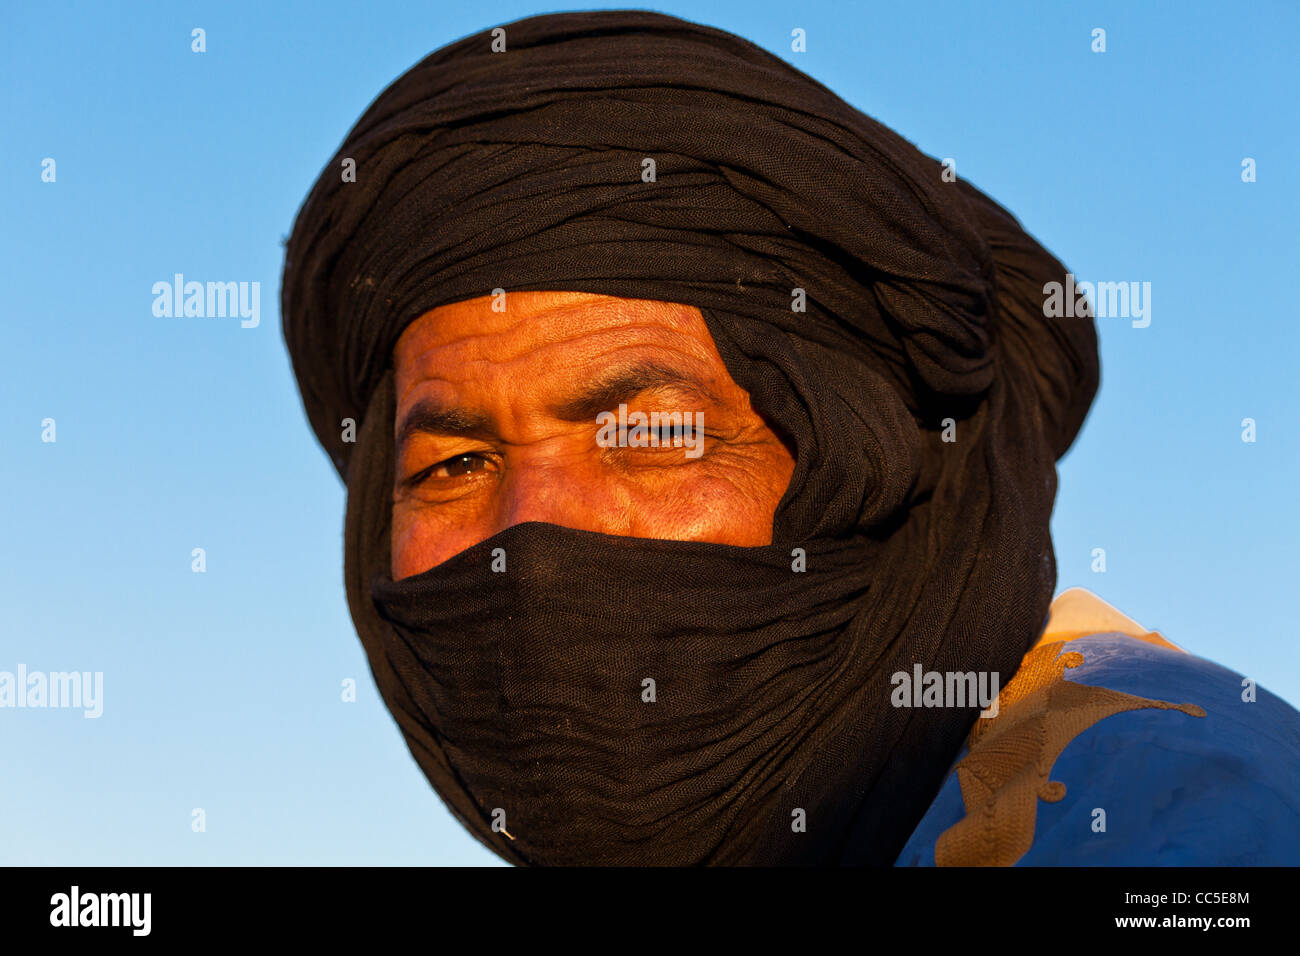 Portrait of man dressed in traditional Bedouin clothes, Marrakesh, Morocco Stock Photo